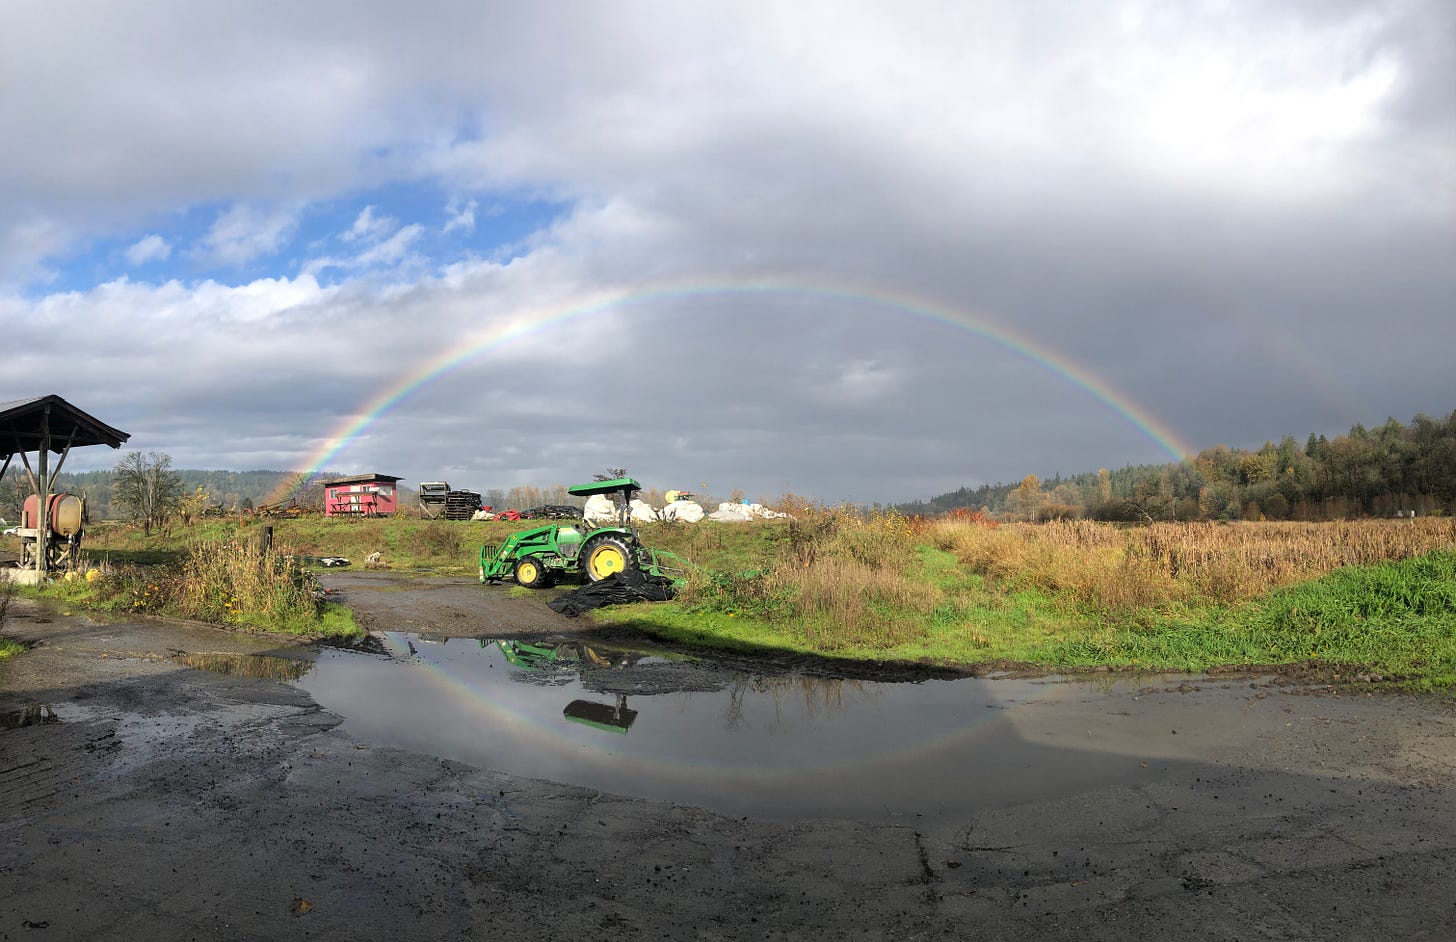 a full rainbow, stretched end-to-end, over our farm, reflected in a puddle below, with a bright green tractor in the foreground